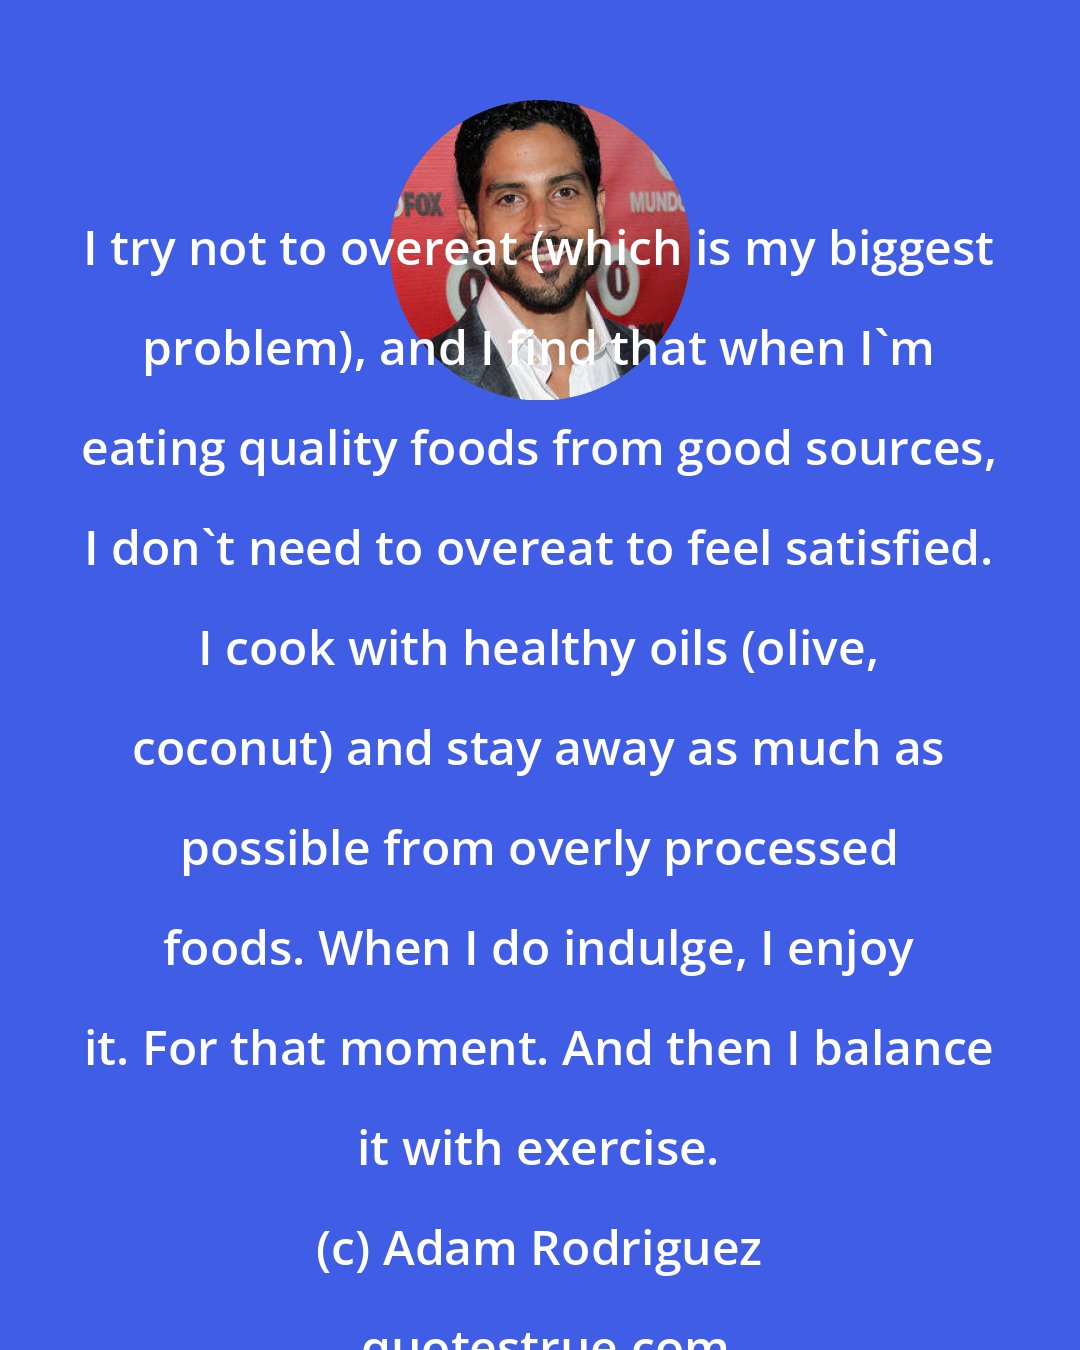 Adam Rodriguez: I try not to overeat (which is my biggest problem), and I find that when I'm eating quality foods from good sources, I don't need to overeat to feel satisfied. I cook with healthy oils (olive, coconut) and stay away as much as possible from overly processed foods. When I do indulge, I enjoy it. For that moment. And then I balance it with exercise.